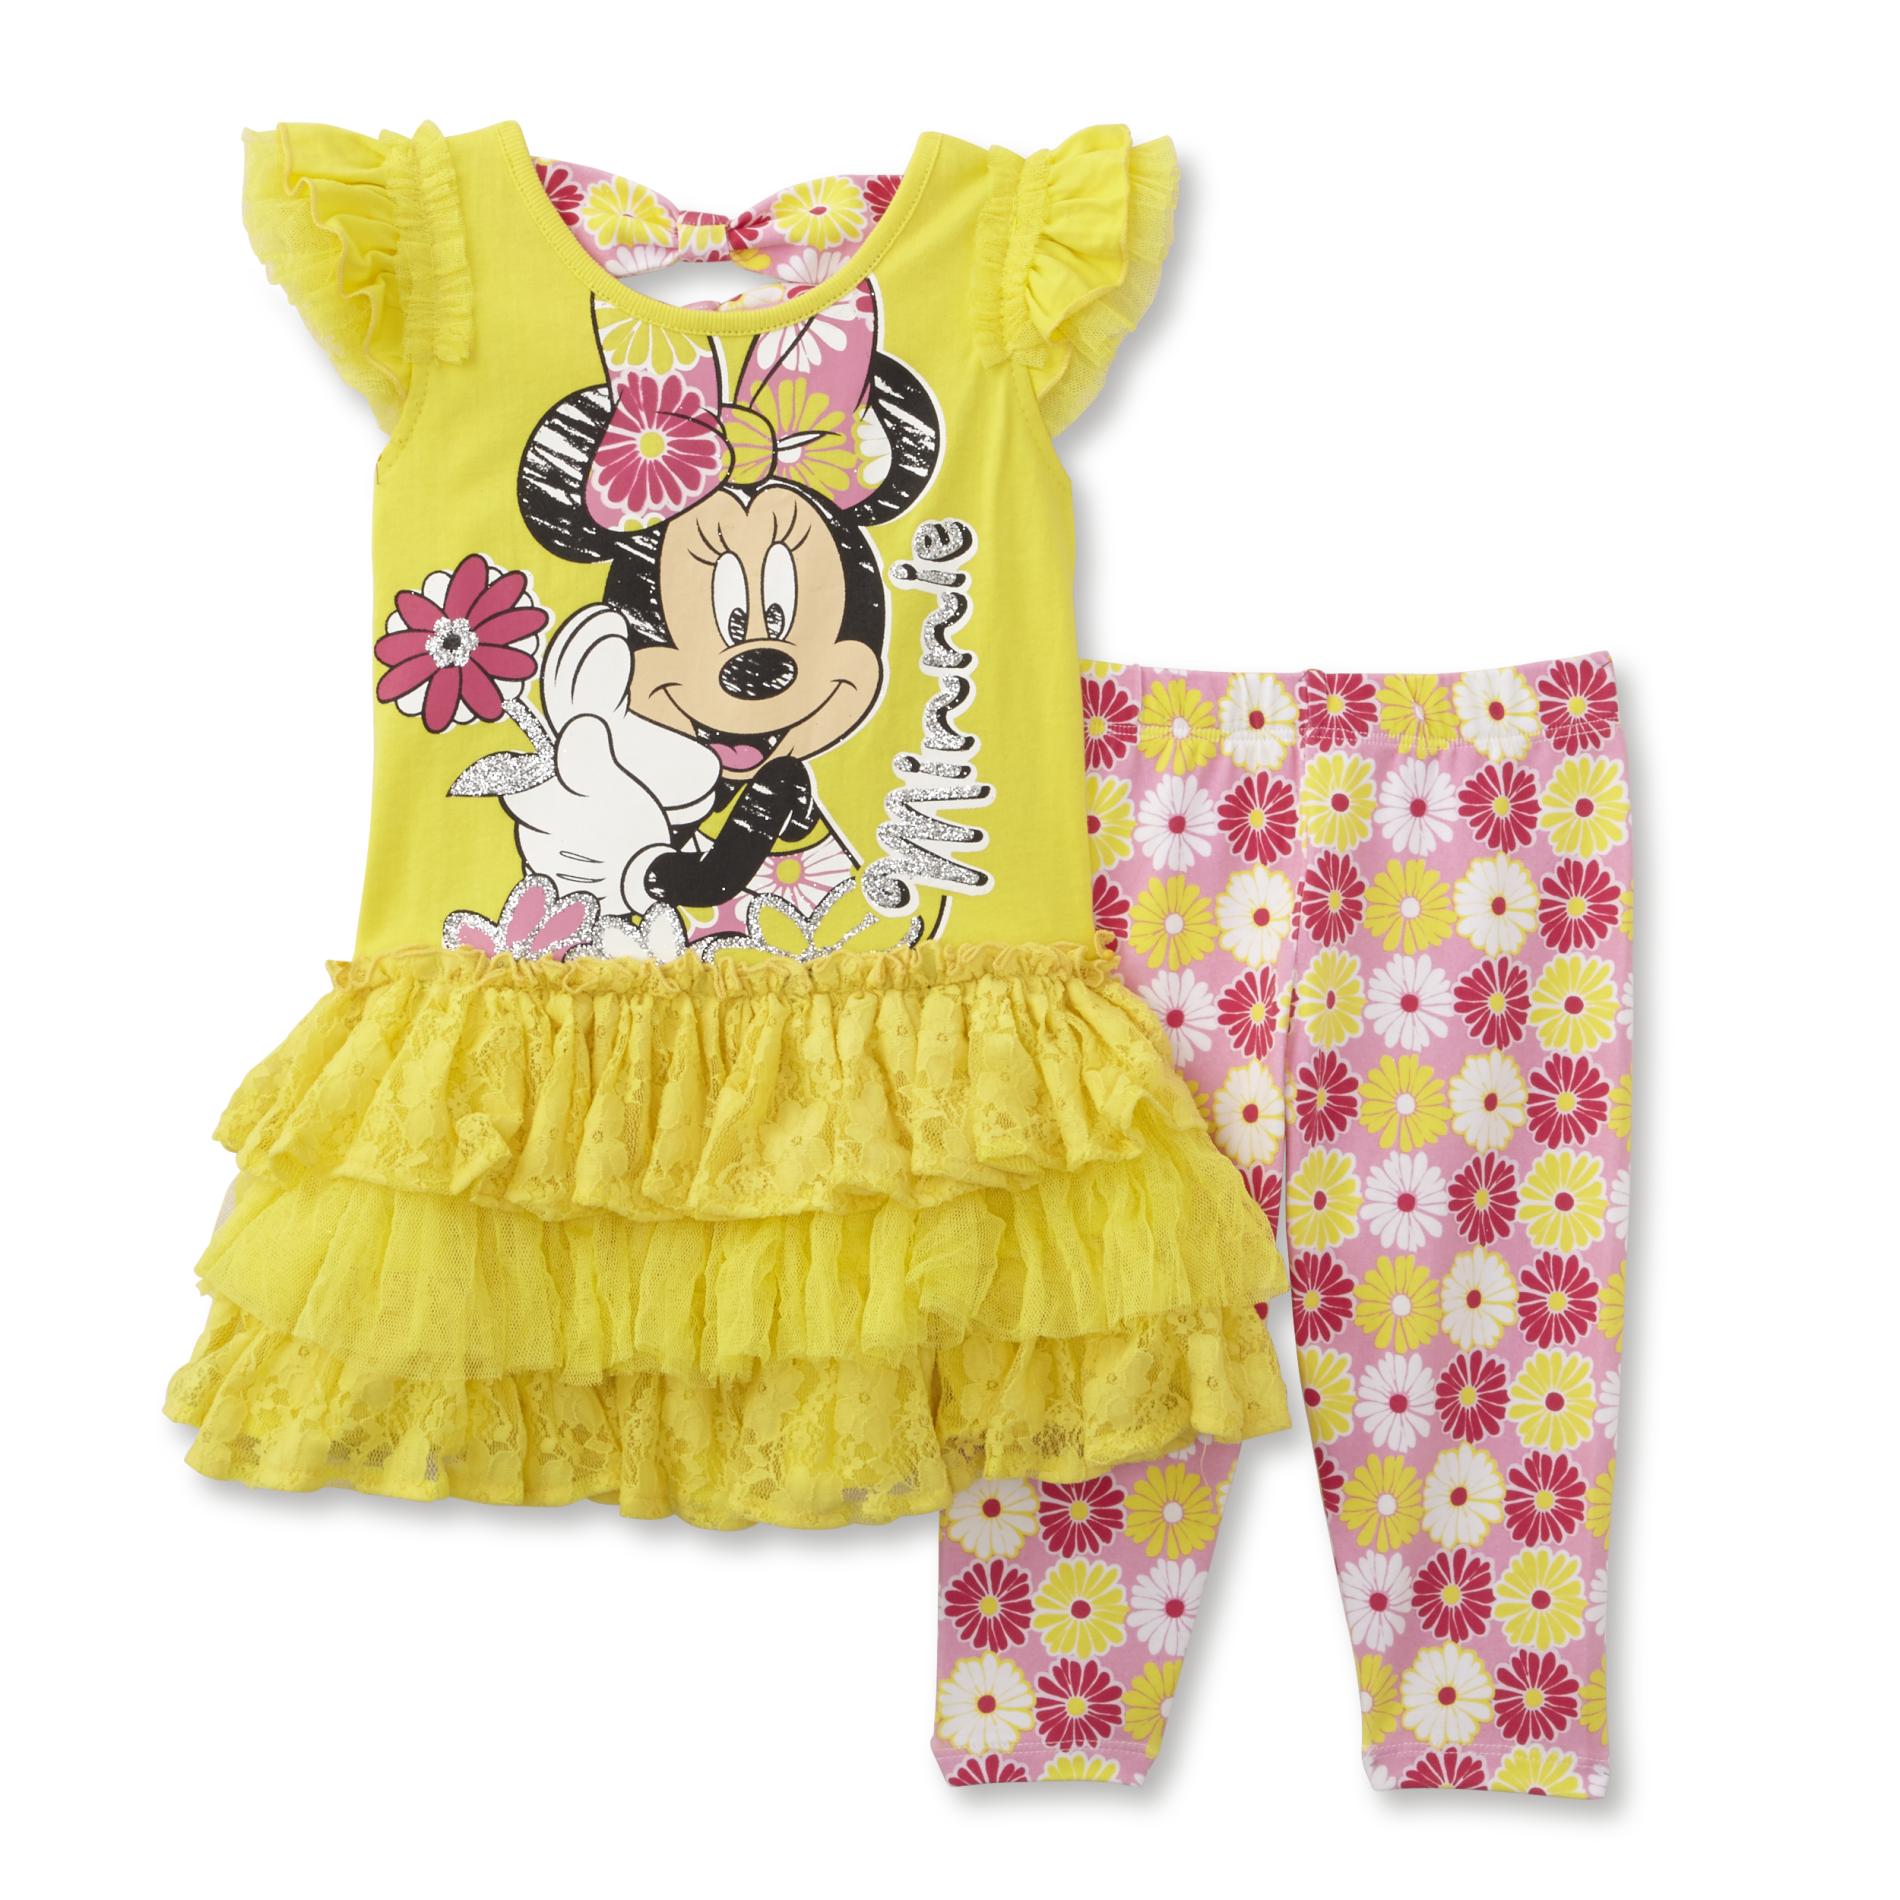 Disney Minnie Mouse Infant & Toddler Girl's Top & Leggings - Floral